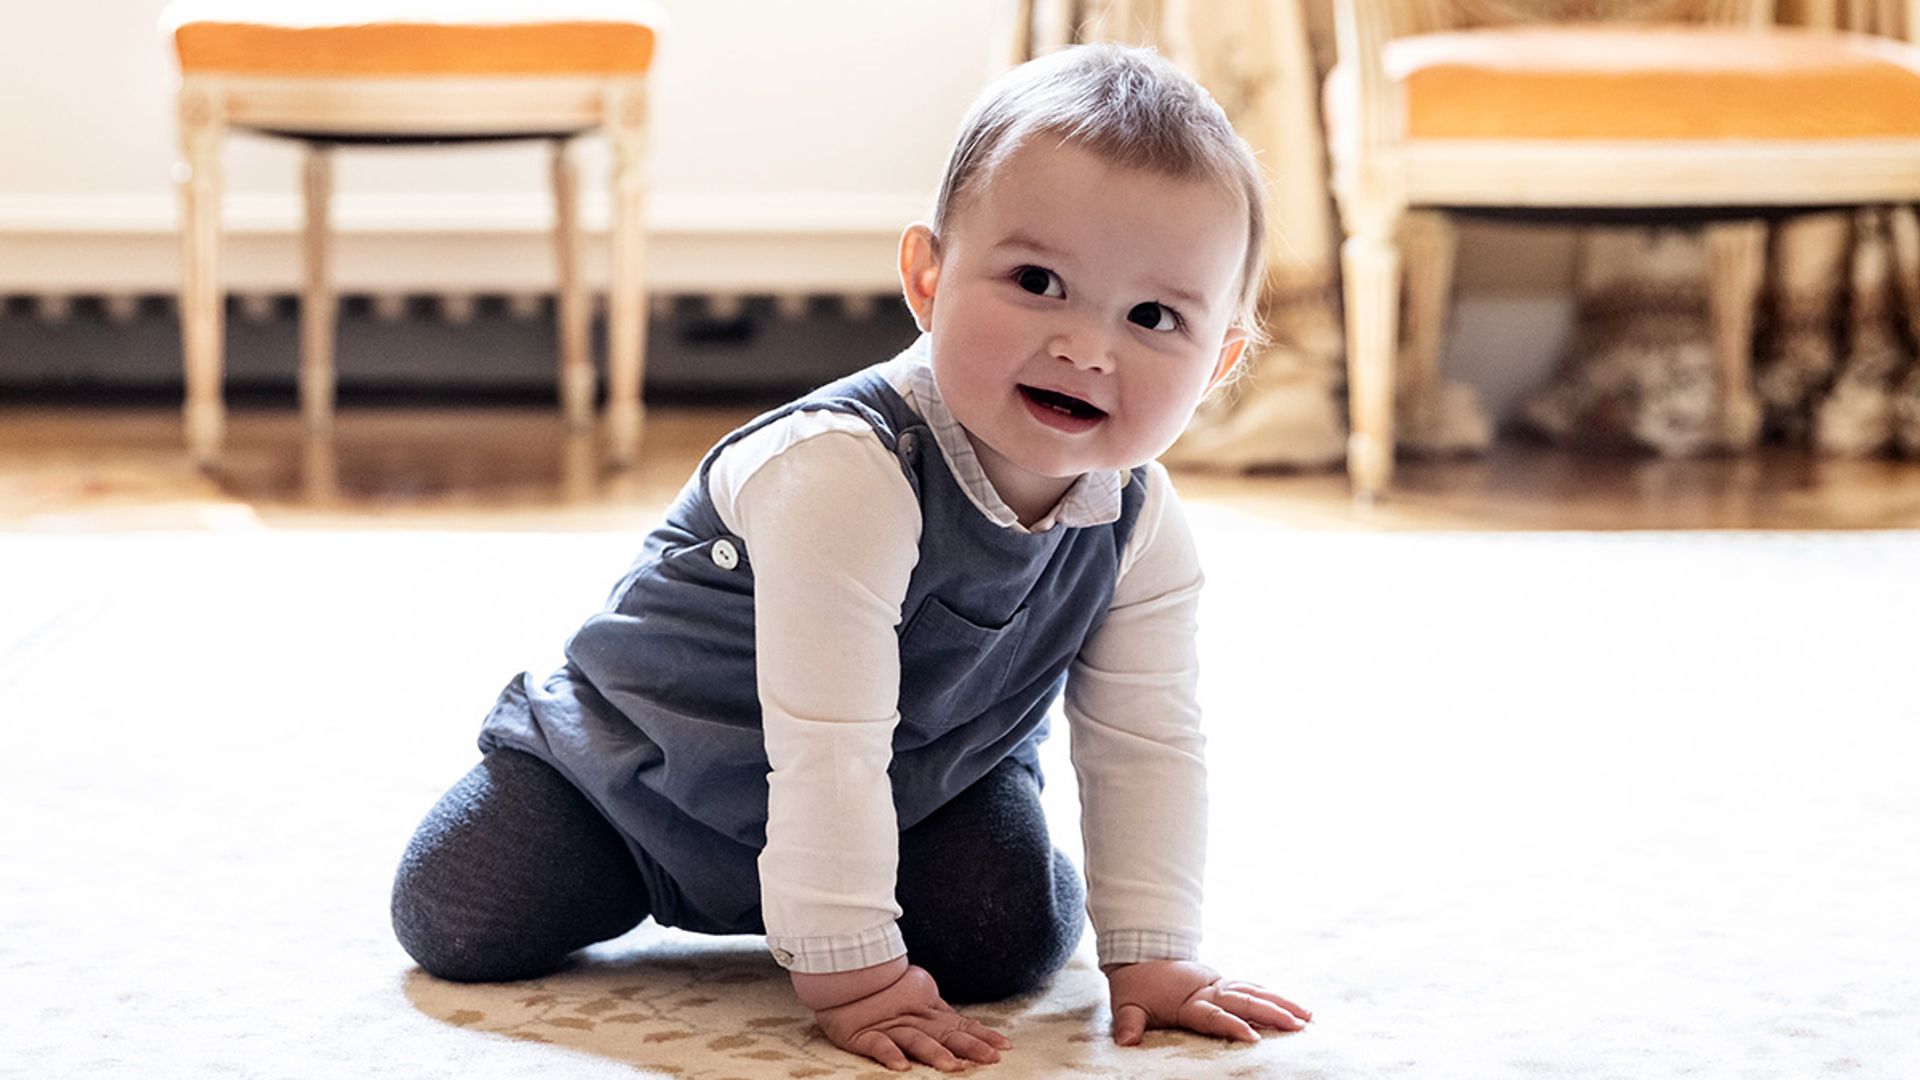 Prince Charles of Luxembourg's first birthday photos are just the cutest